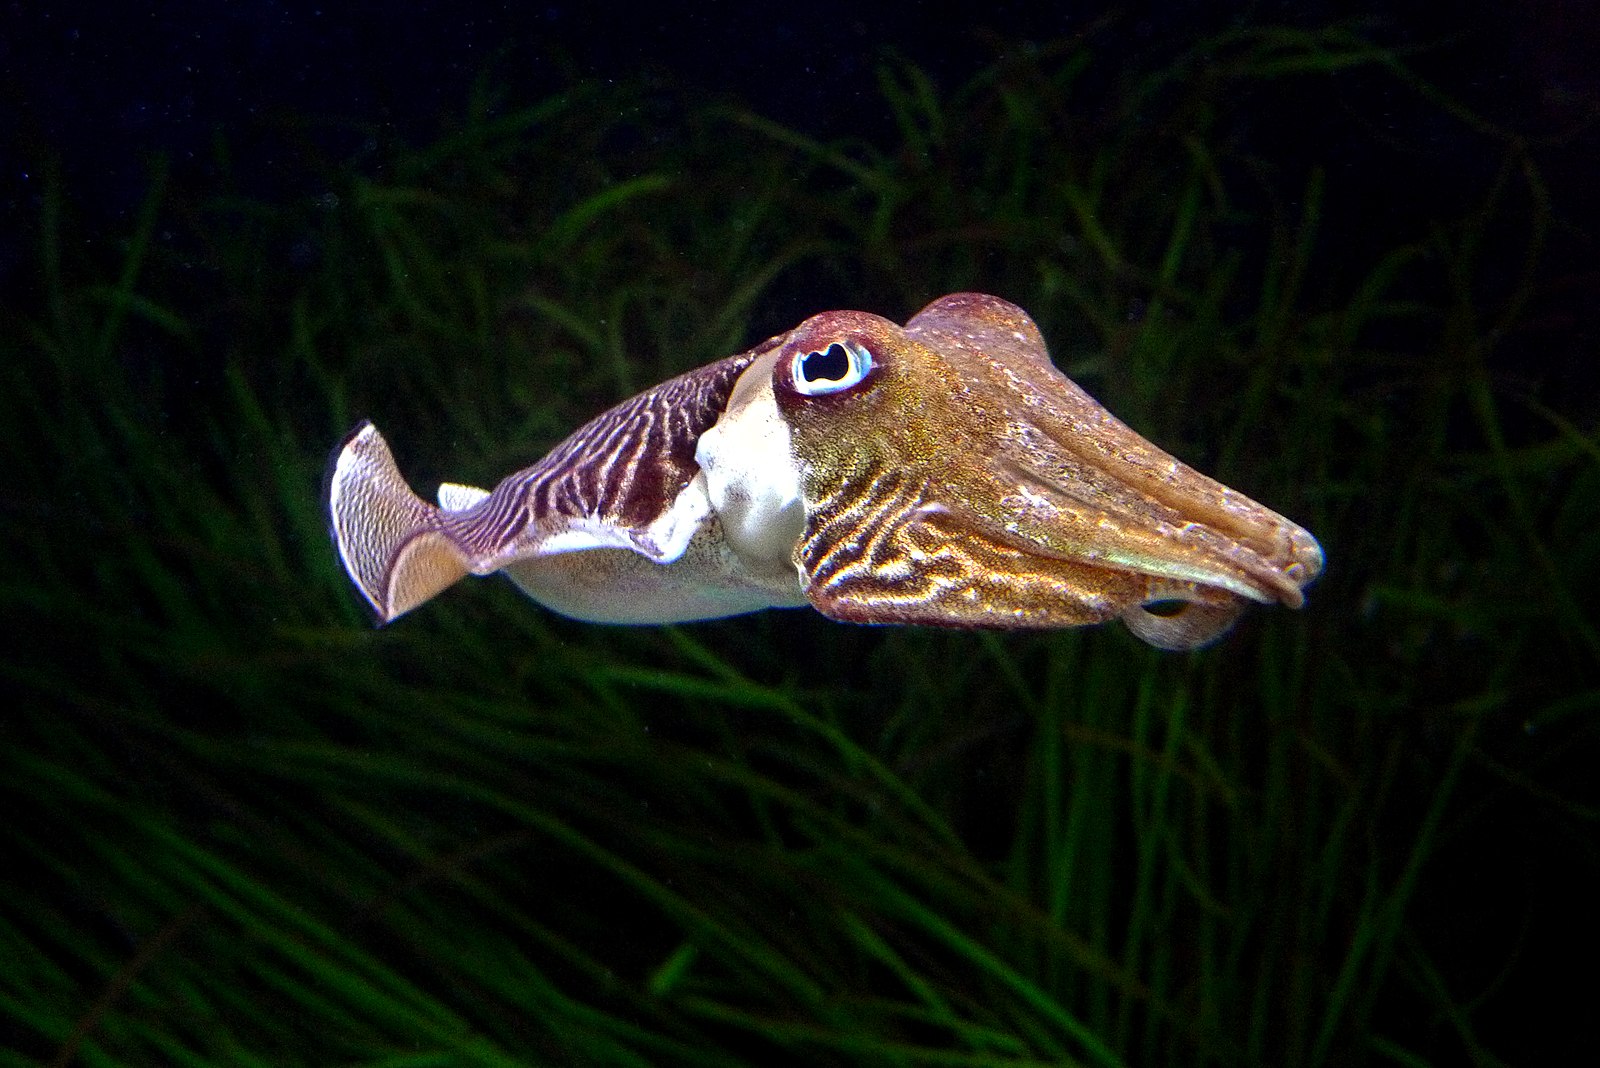 Cuttlefish Pass Intelligence Test by Resisting Temptation